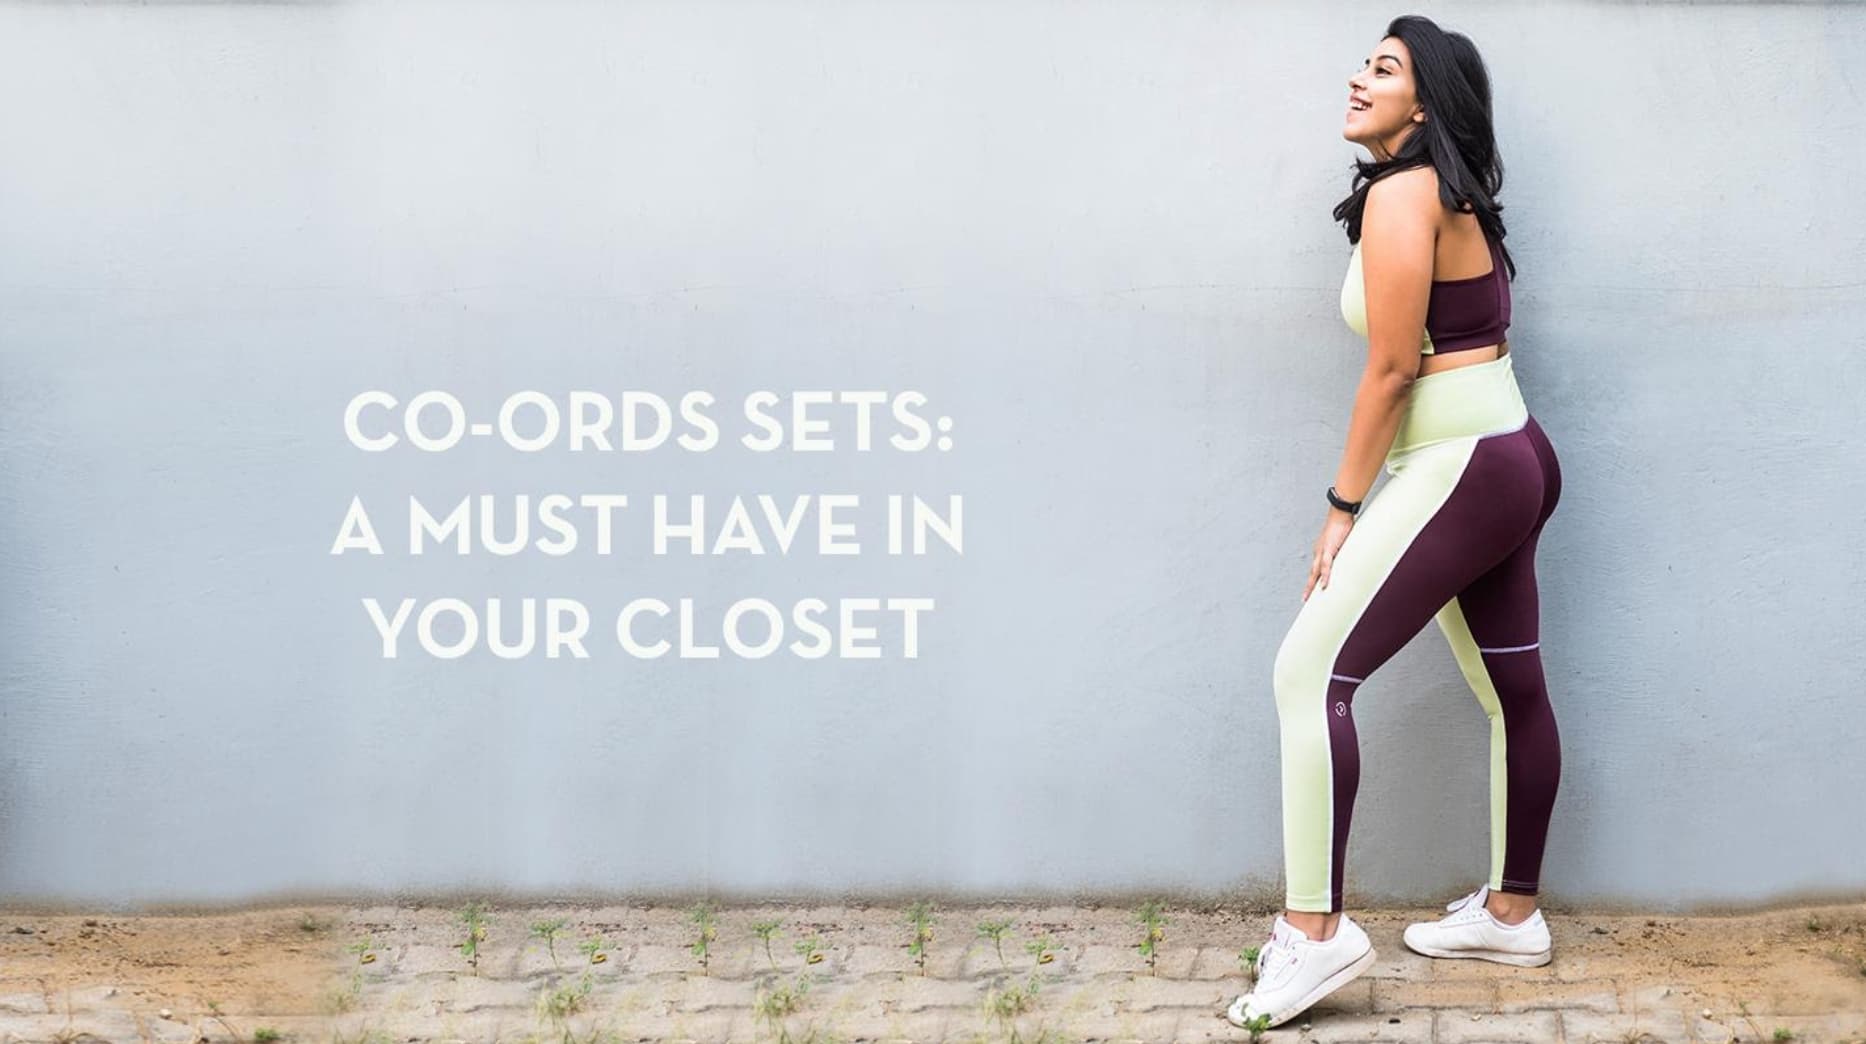 The easiest way to find the perfect outfit